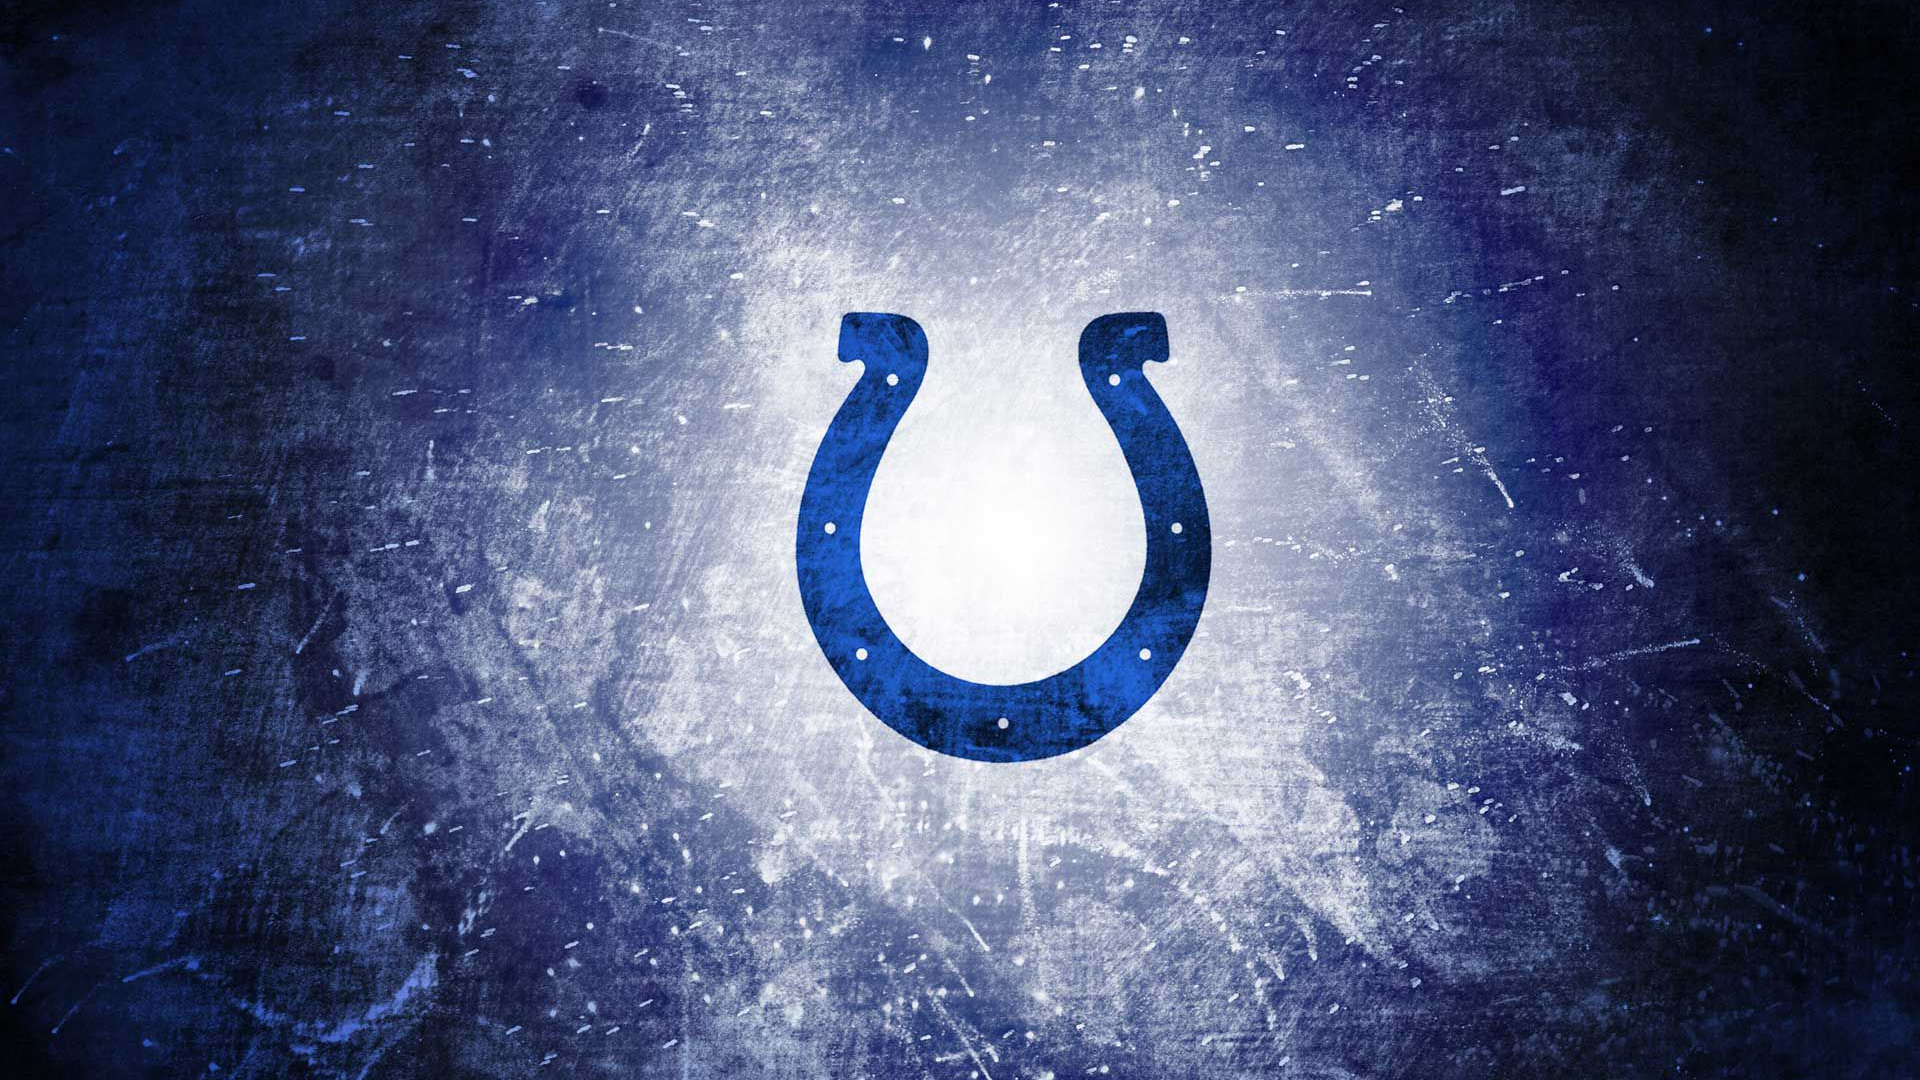 Indianapolis Colts Logo Wallpaper for Desktop Background - HD